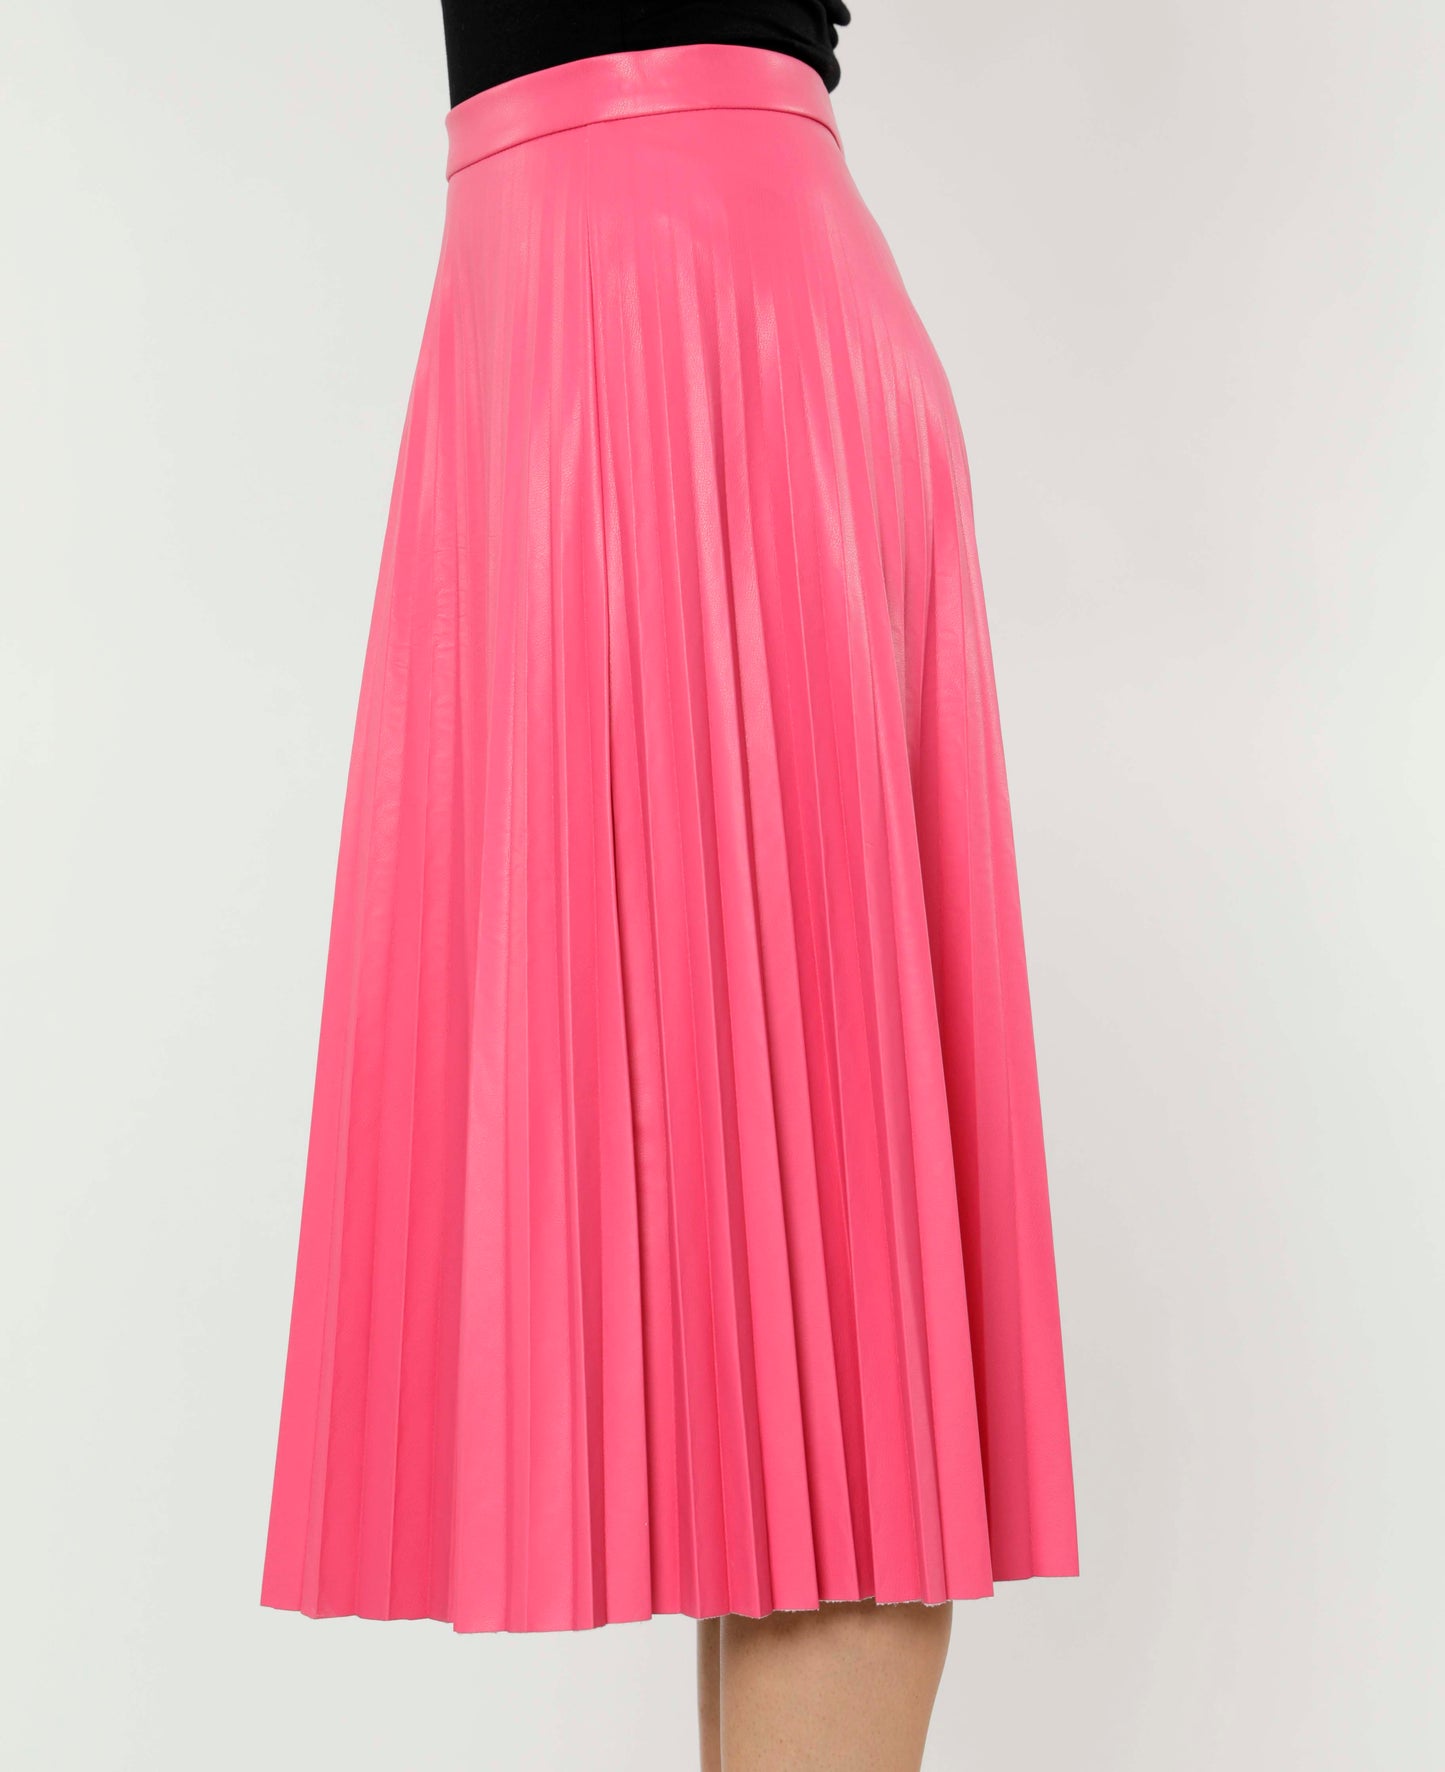 Vegan Leather pleated skirt. Hot Pink, side